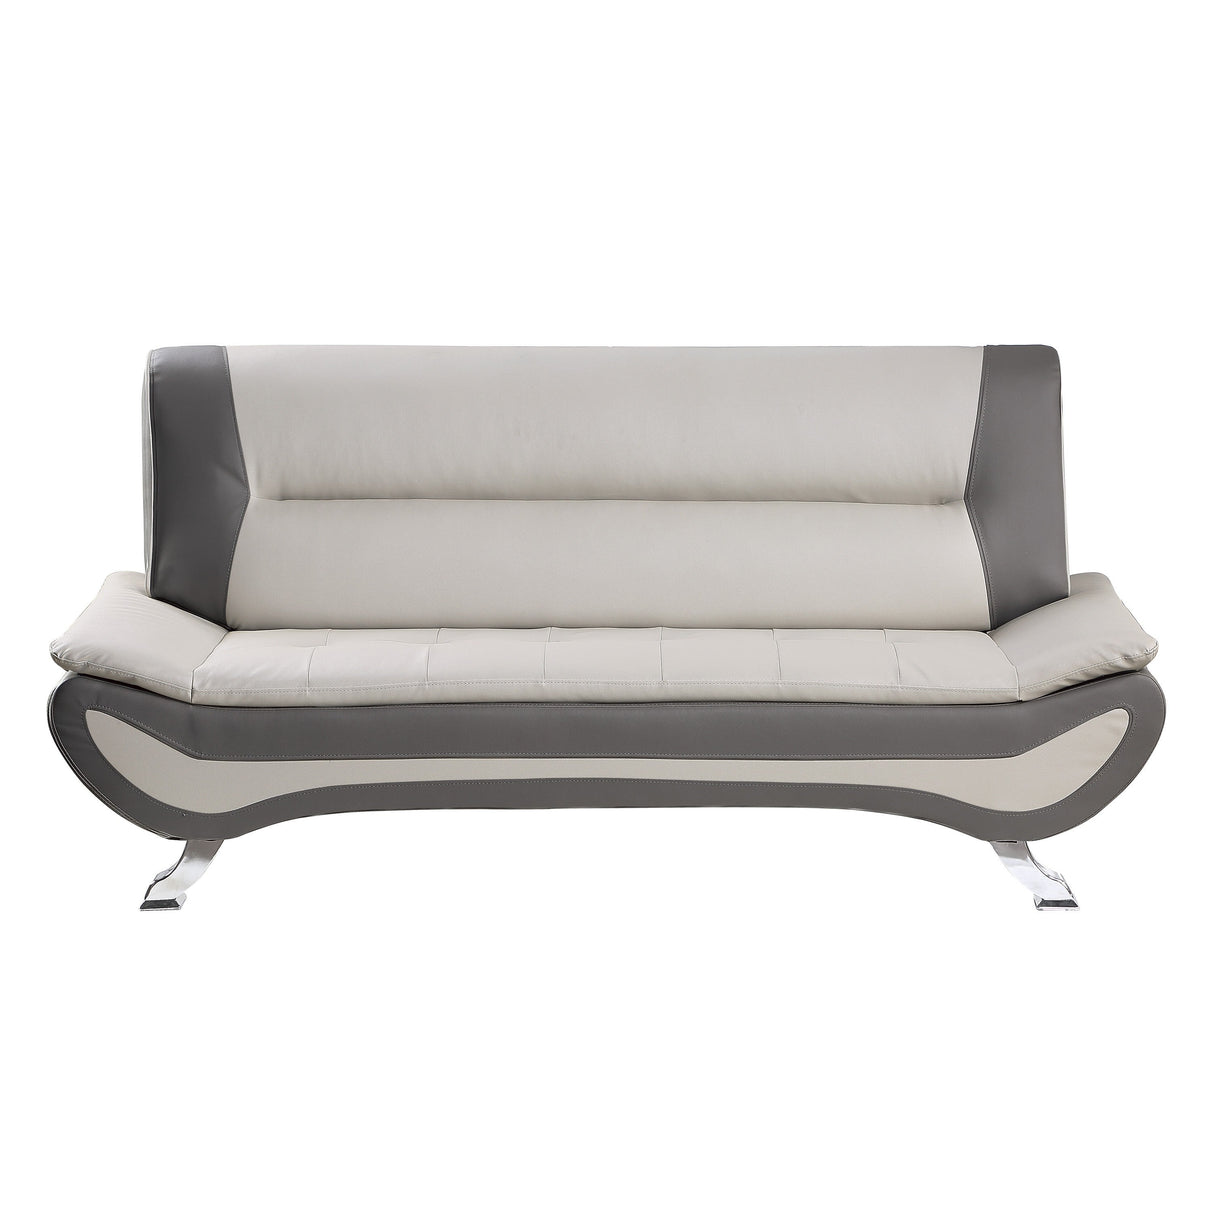 Veloce Beige/Gray Faux Leather Sofa